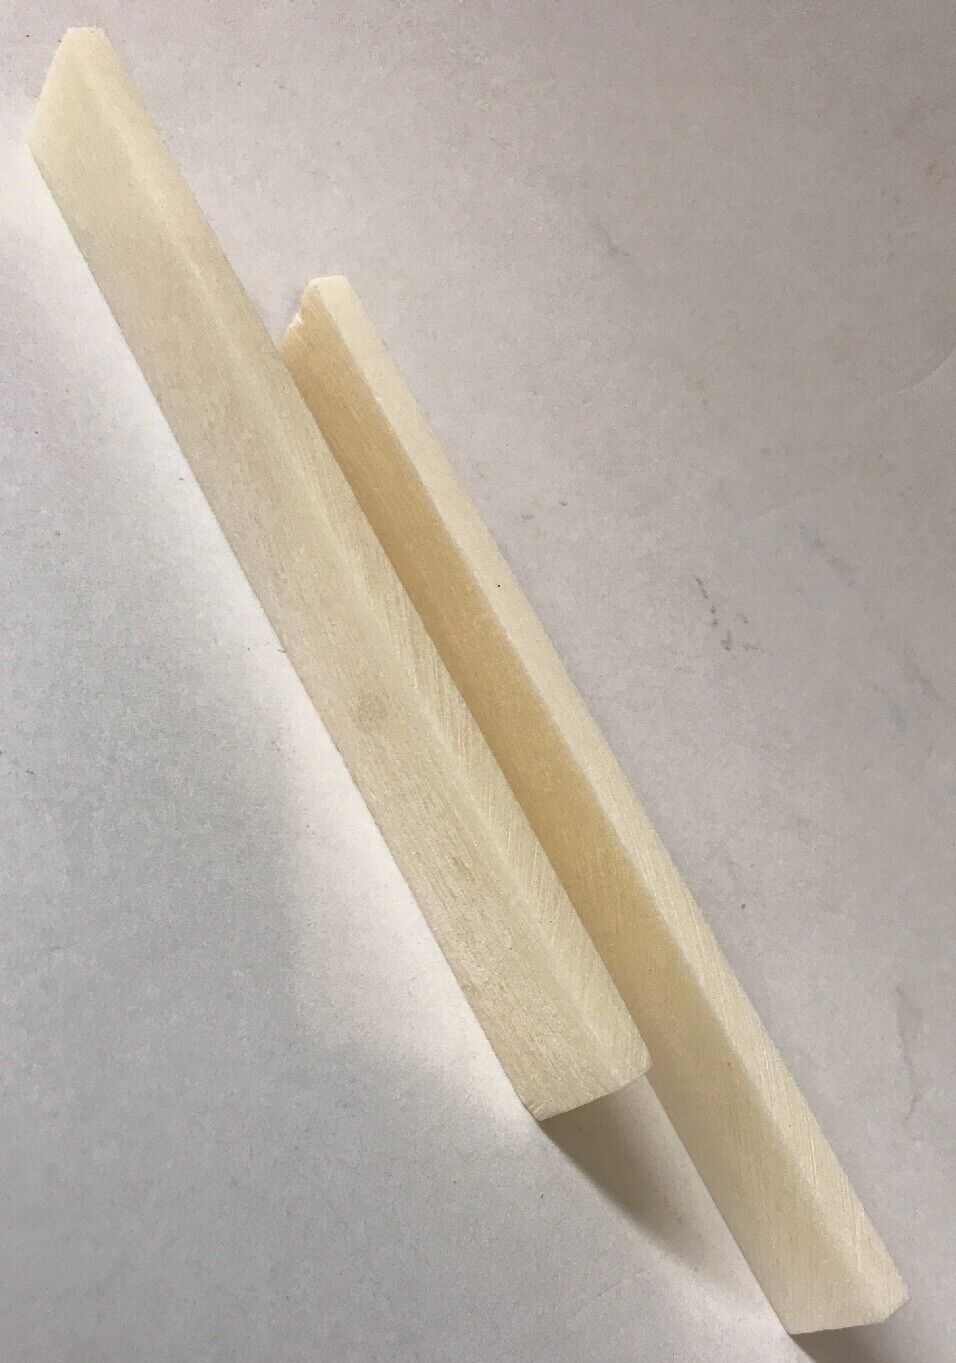 Two Real Bone Blanks For Custom Saddle Nut Making Guitar Making Pool Cue Inlays aNueNue Does Not Apply